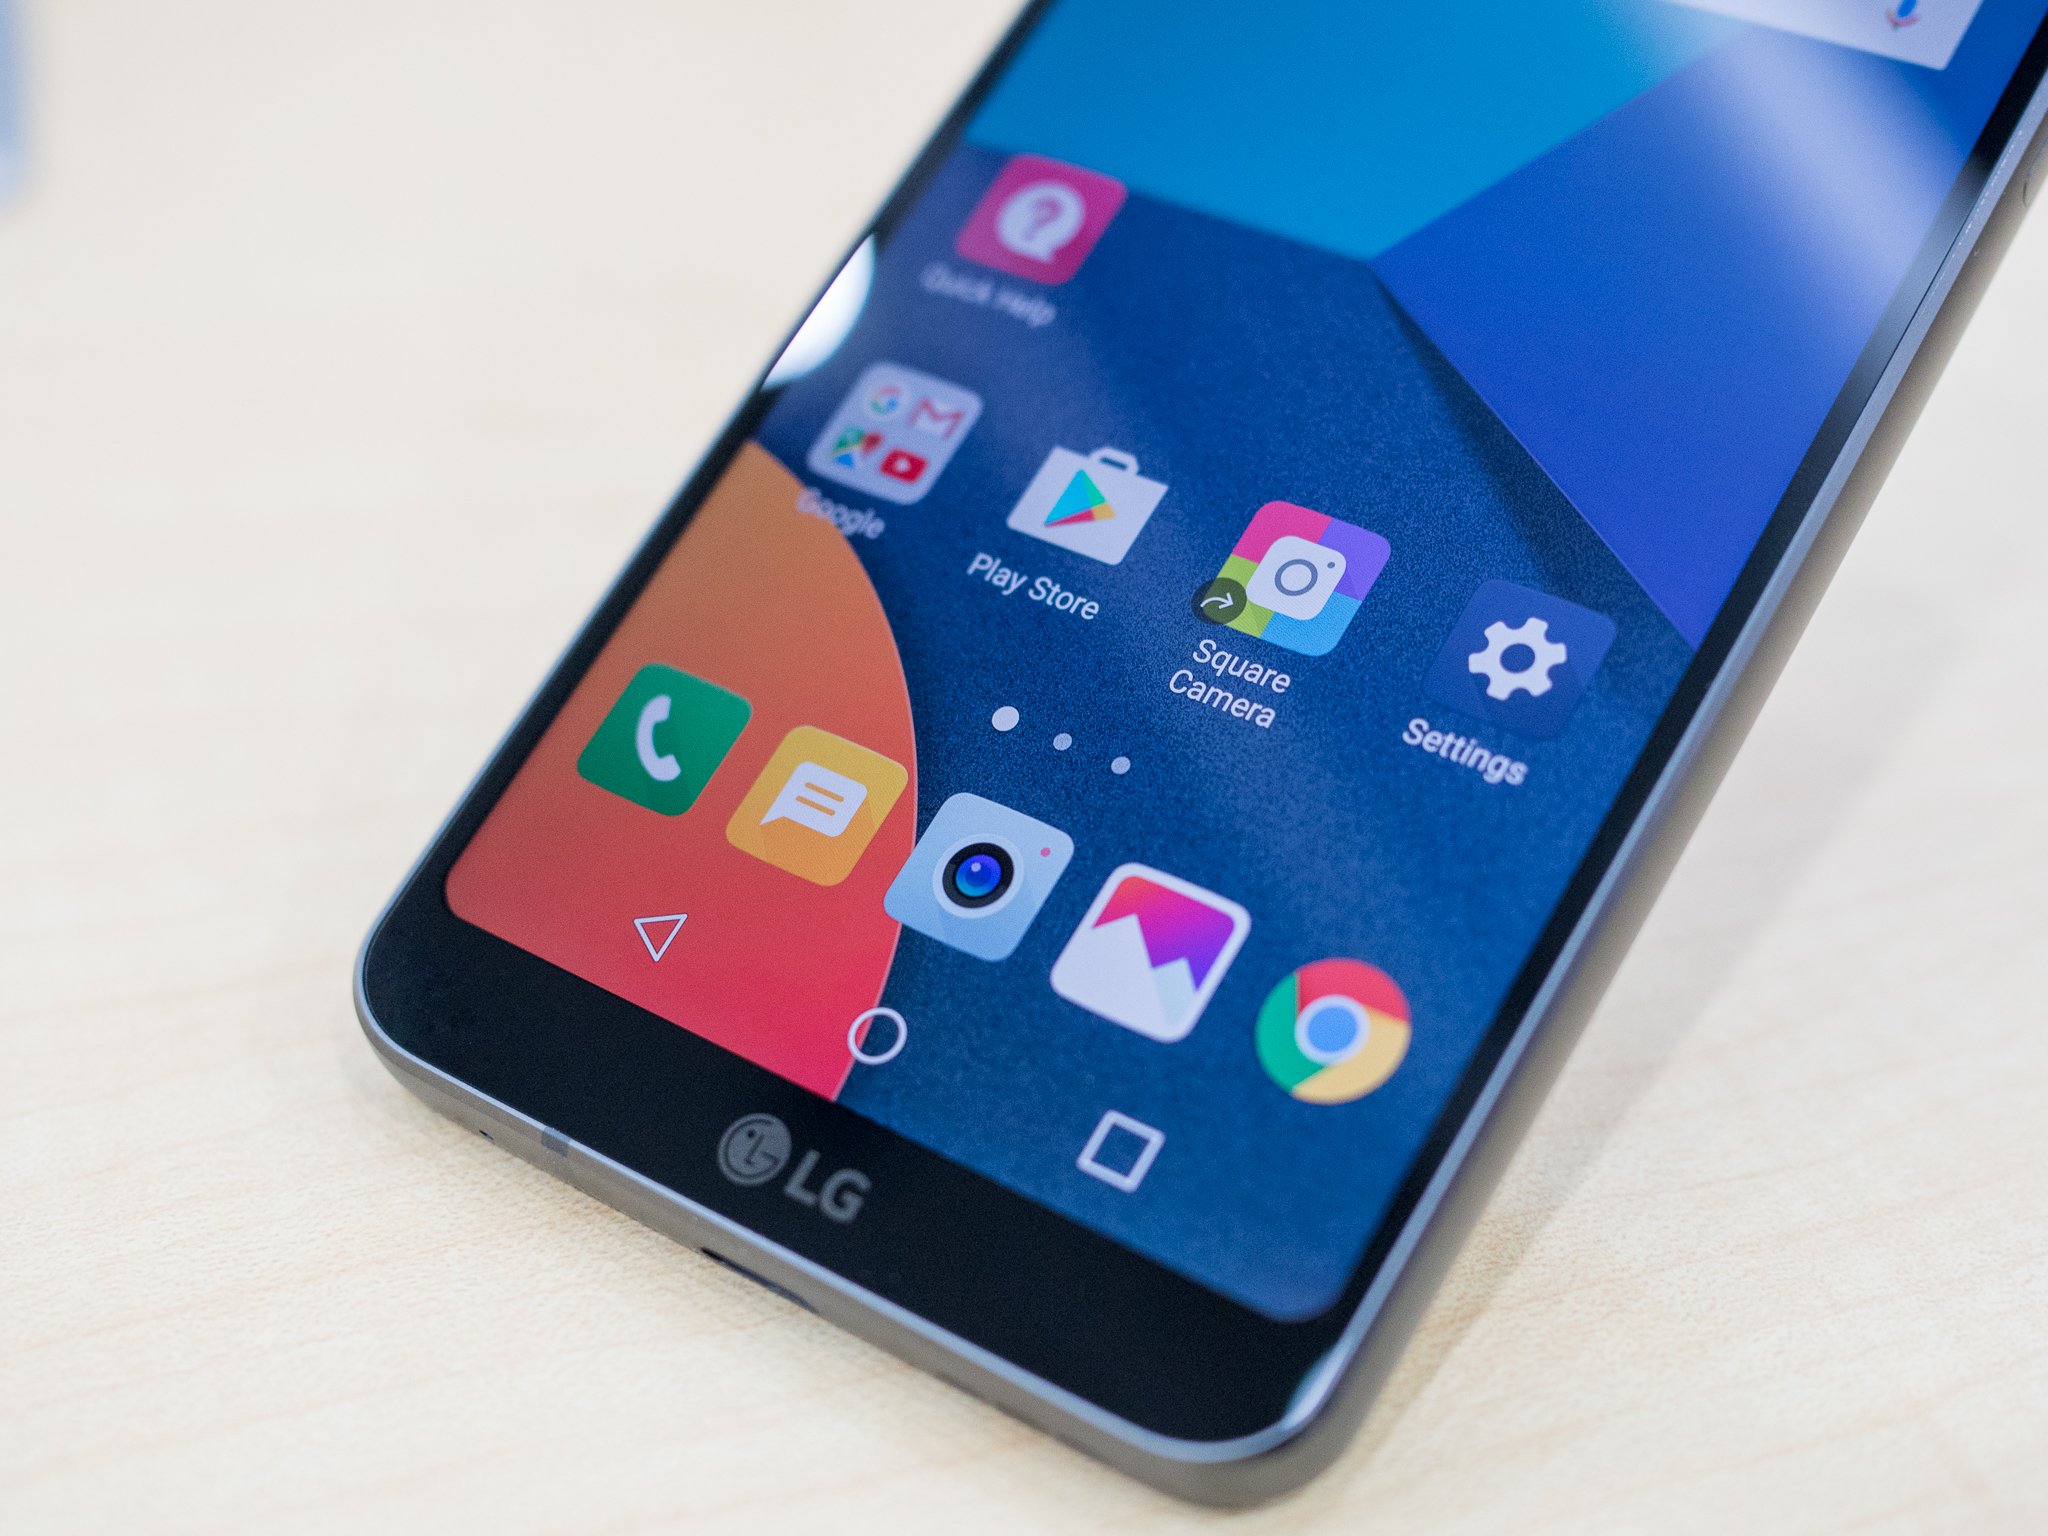 ... LG G6 were able to create an interface that feels more consistent